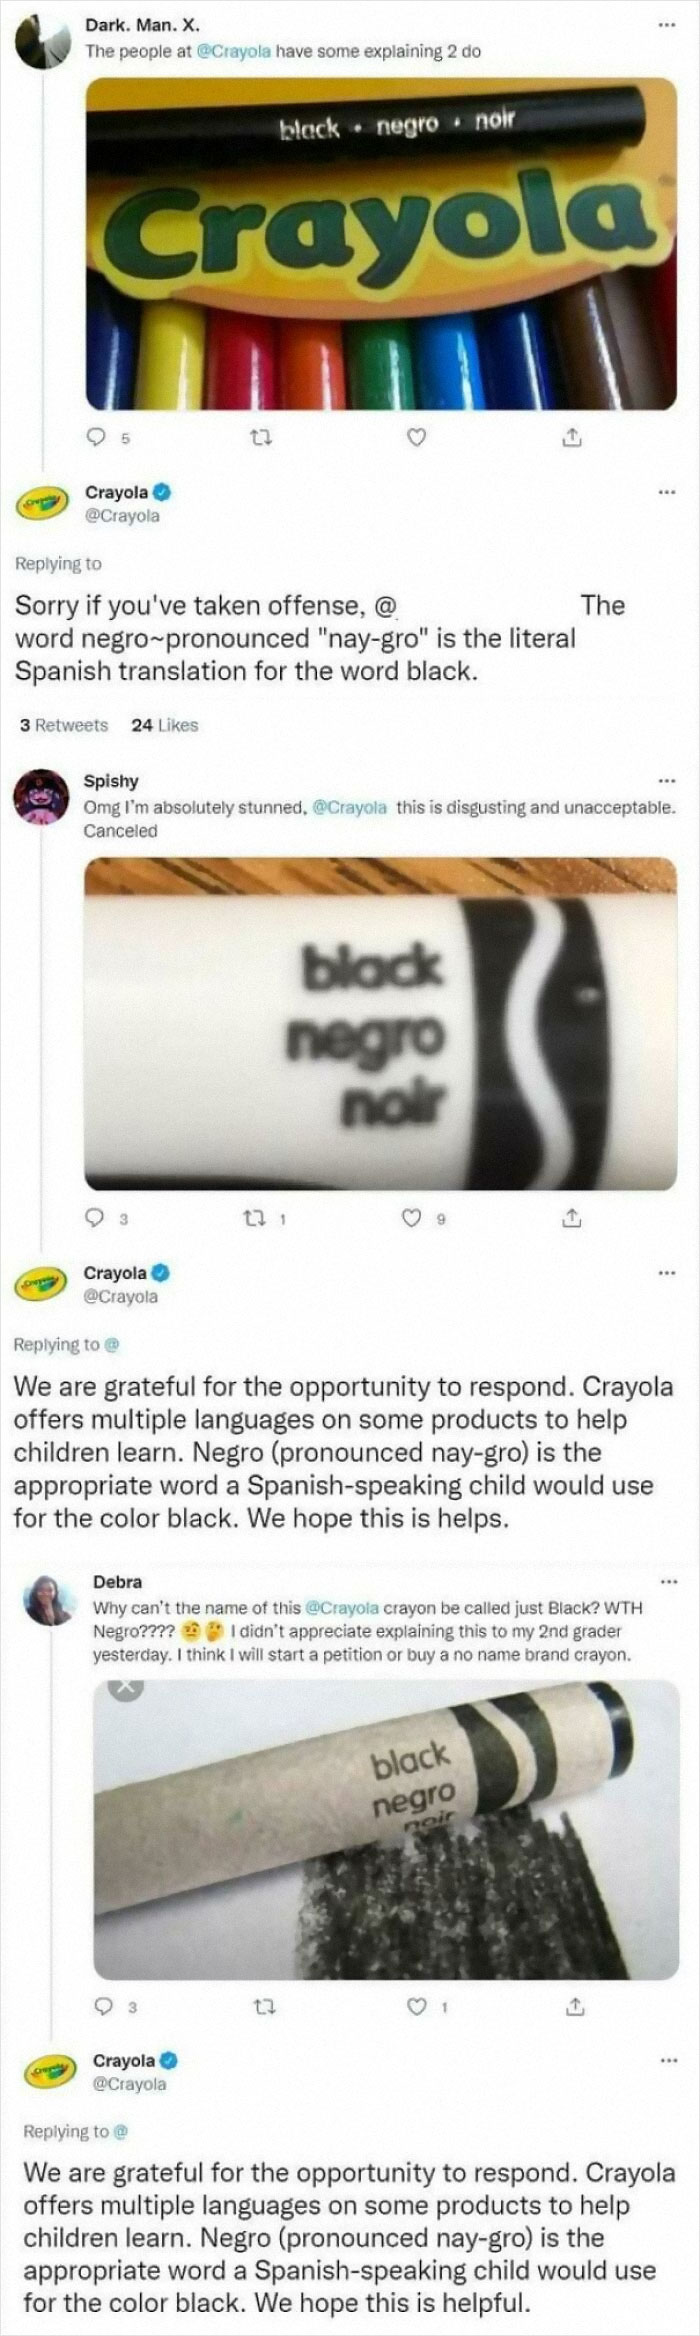 People Think That Negro Refers To The Racial Slur